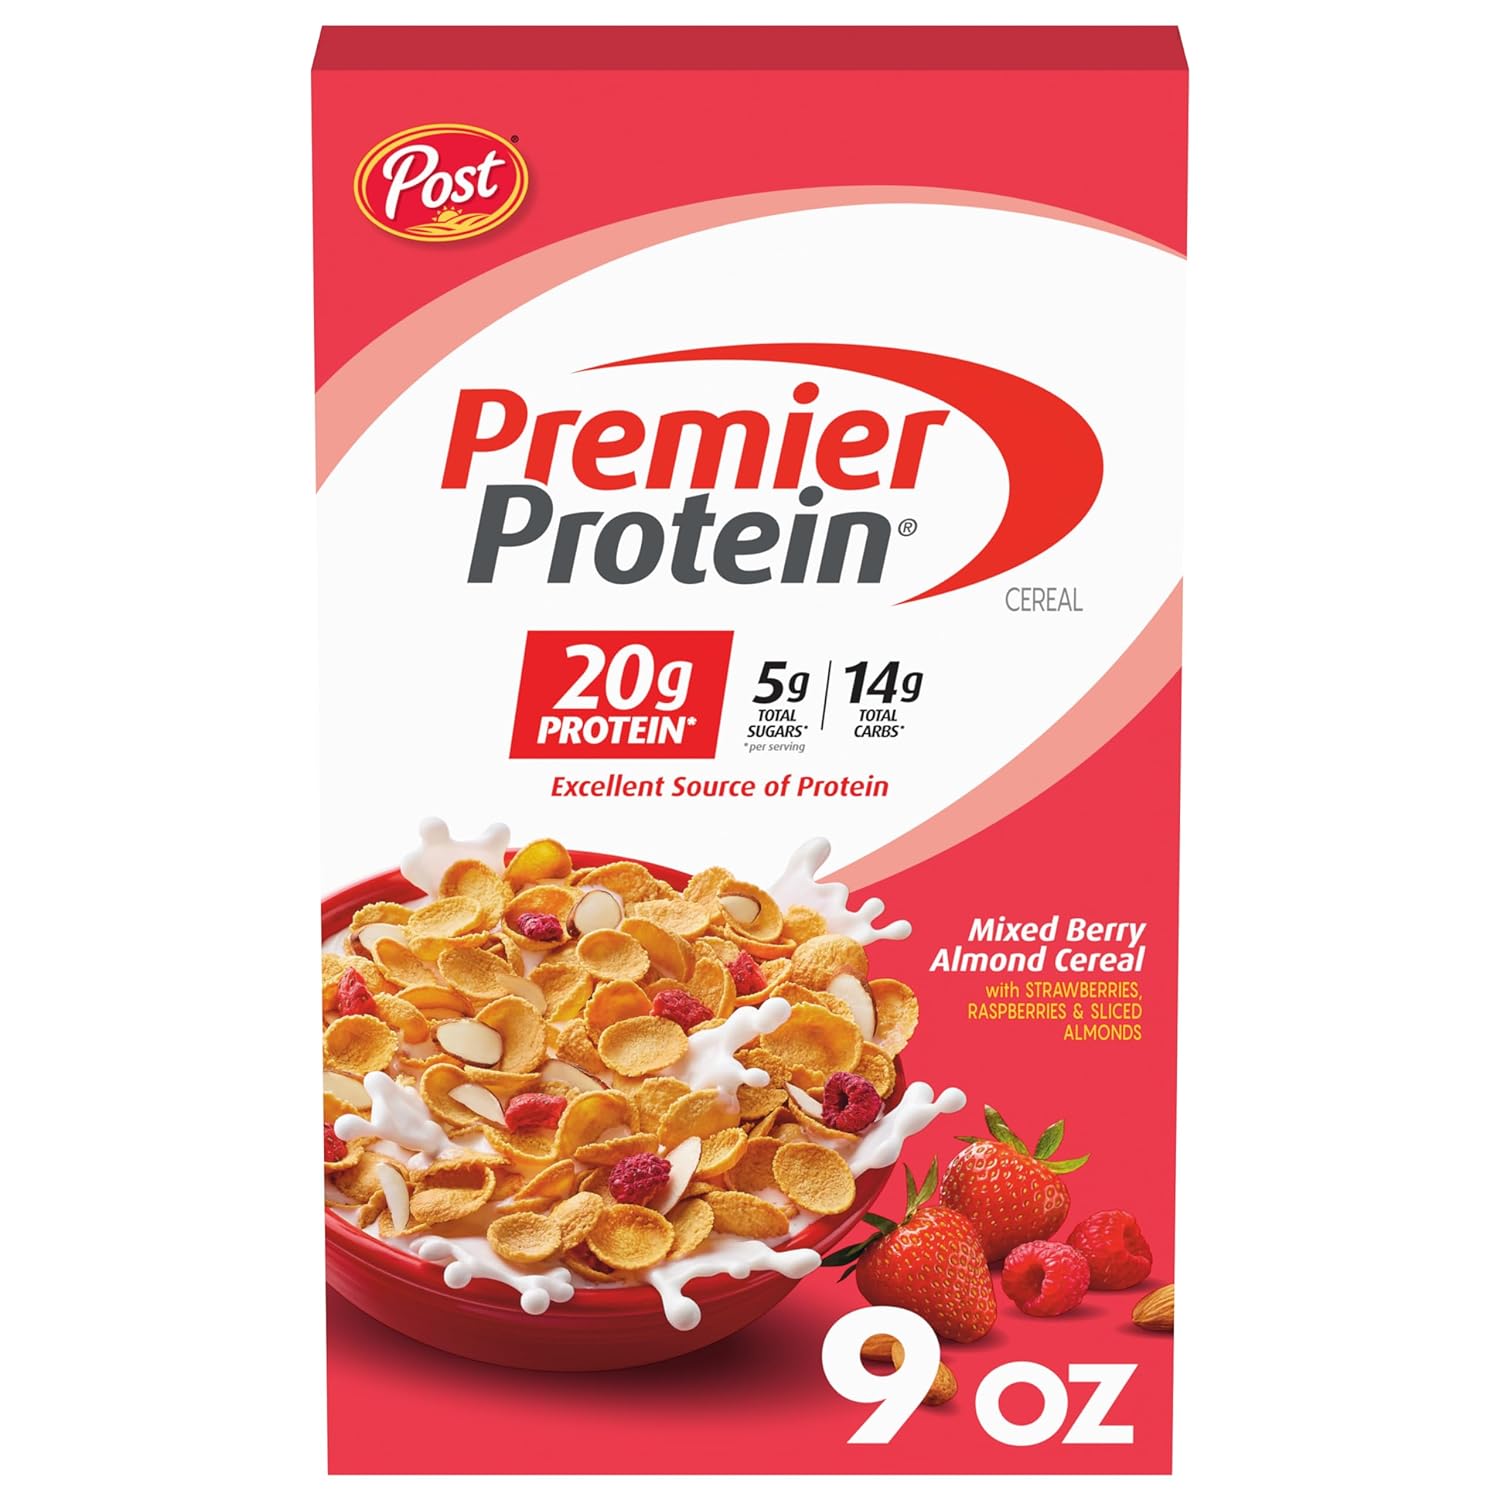 Post Premier Protein Mixed Berry Almond cereal, high protein cereal, protein-rich breakfast or snack made with real berries and almonds, 9 Ounce - 1 count